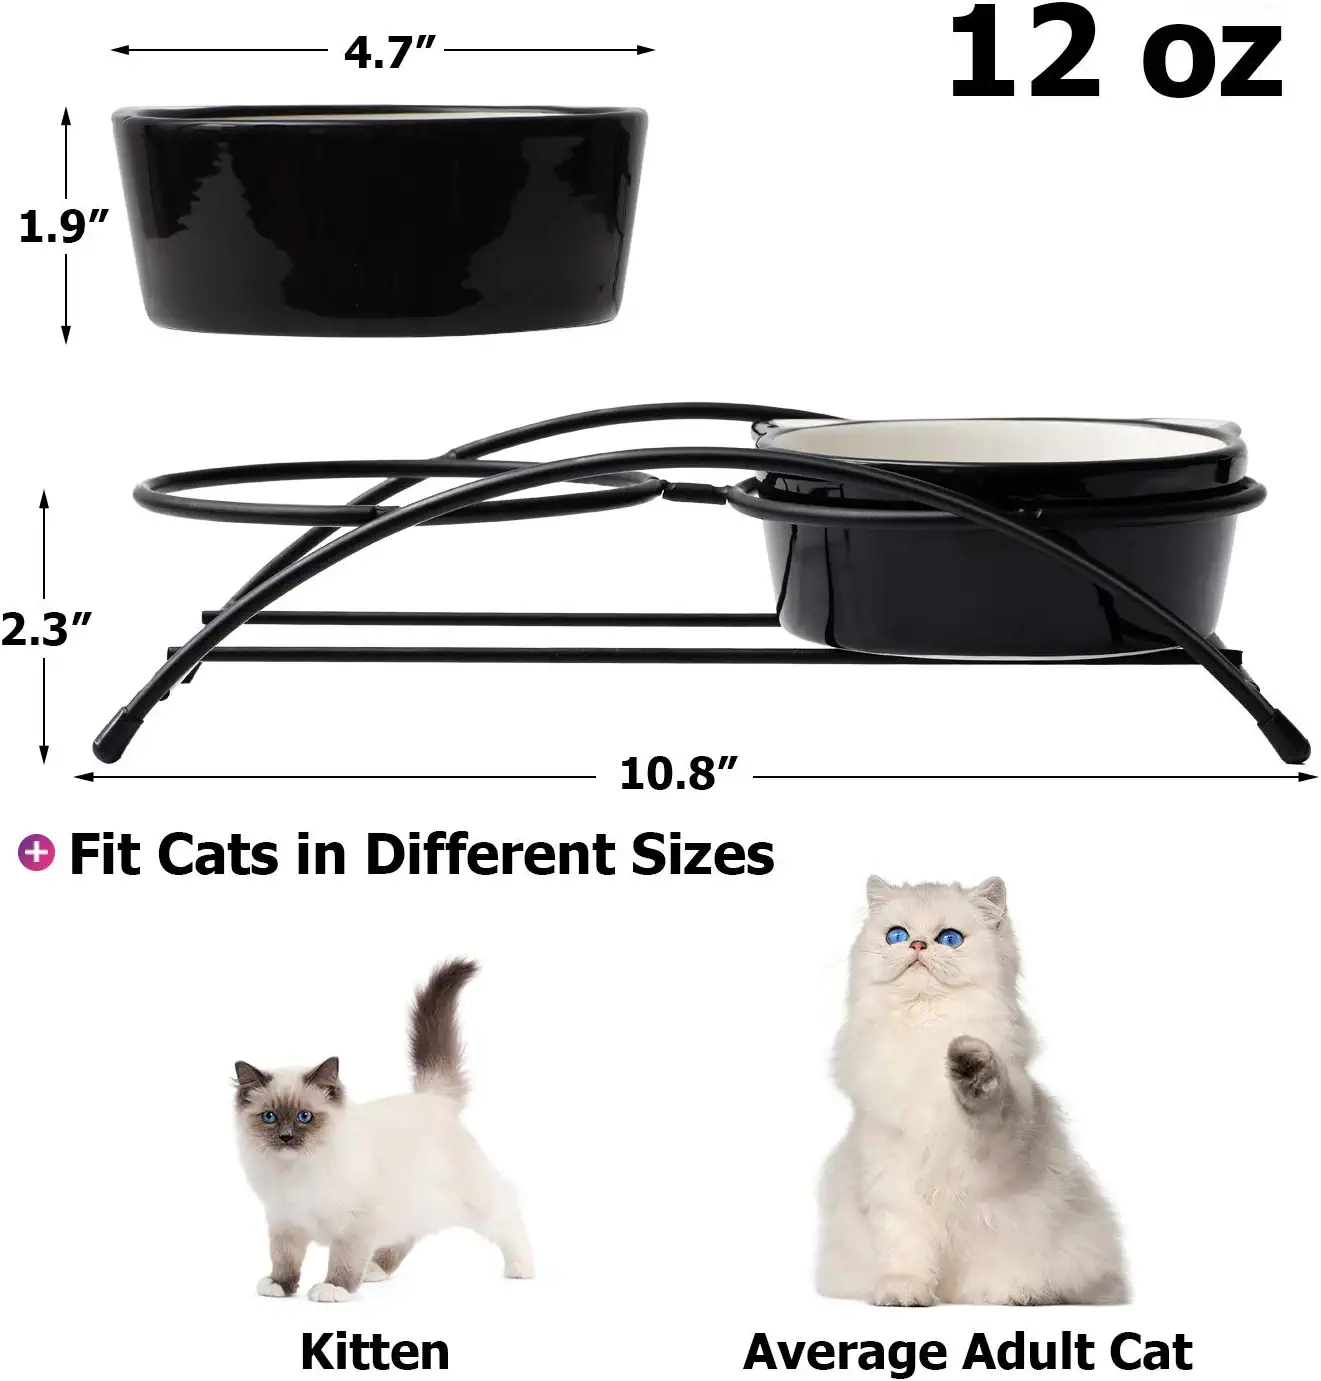 Y YHY Cat Bowls Elevated,Raised Cat Bowls for Food and Water,Ceramic Pet Food Bowls for Cats or Small Dogs,Cute Cat Dishes,12 Ounces,Dishwasher Safe